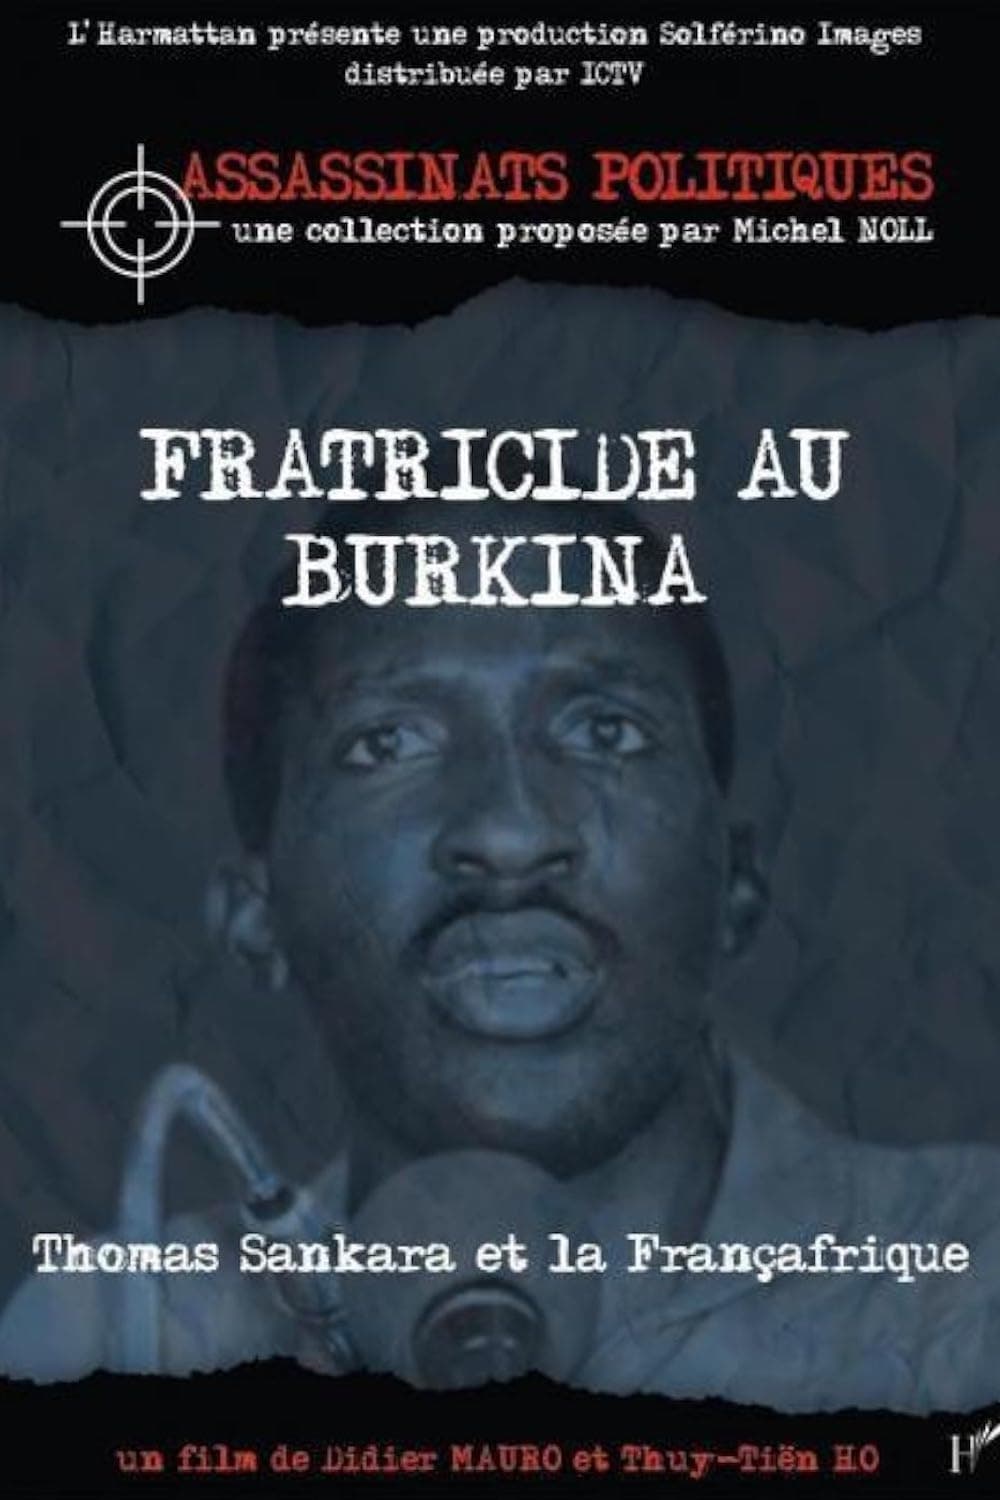 Fractricide in Burkina, Thomas Sankara and French Africa